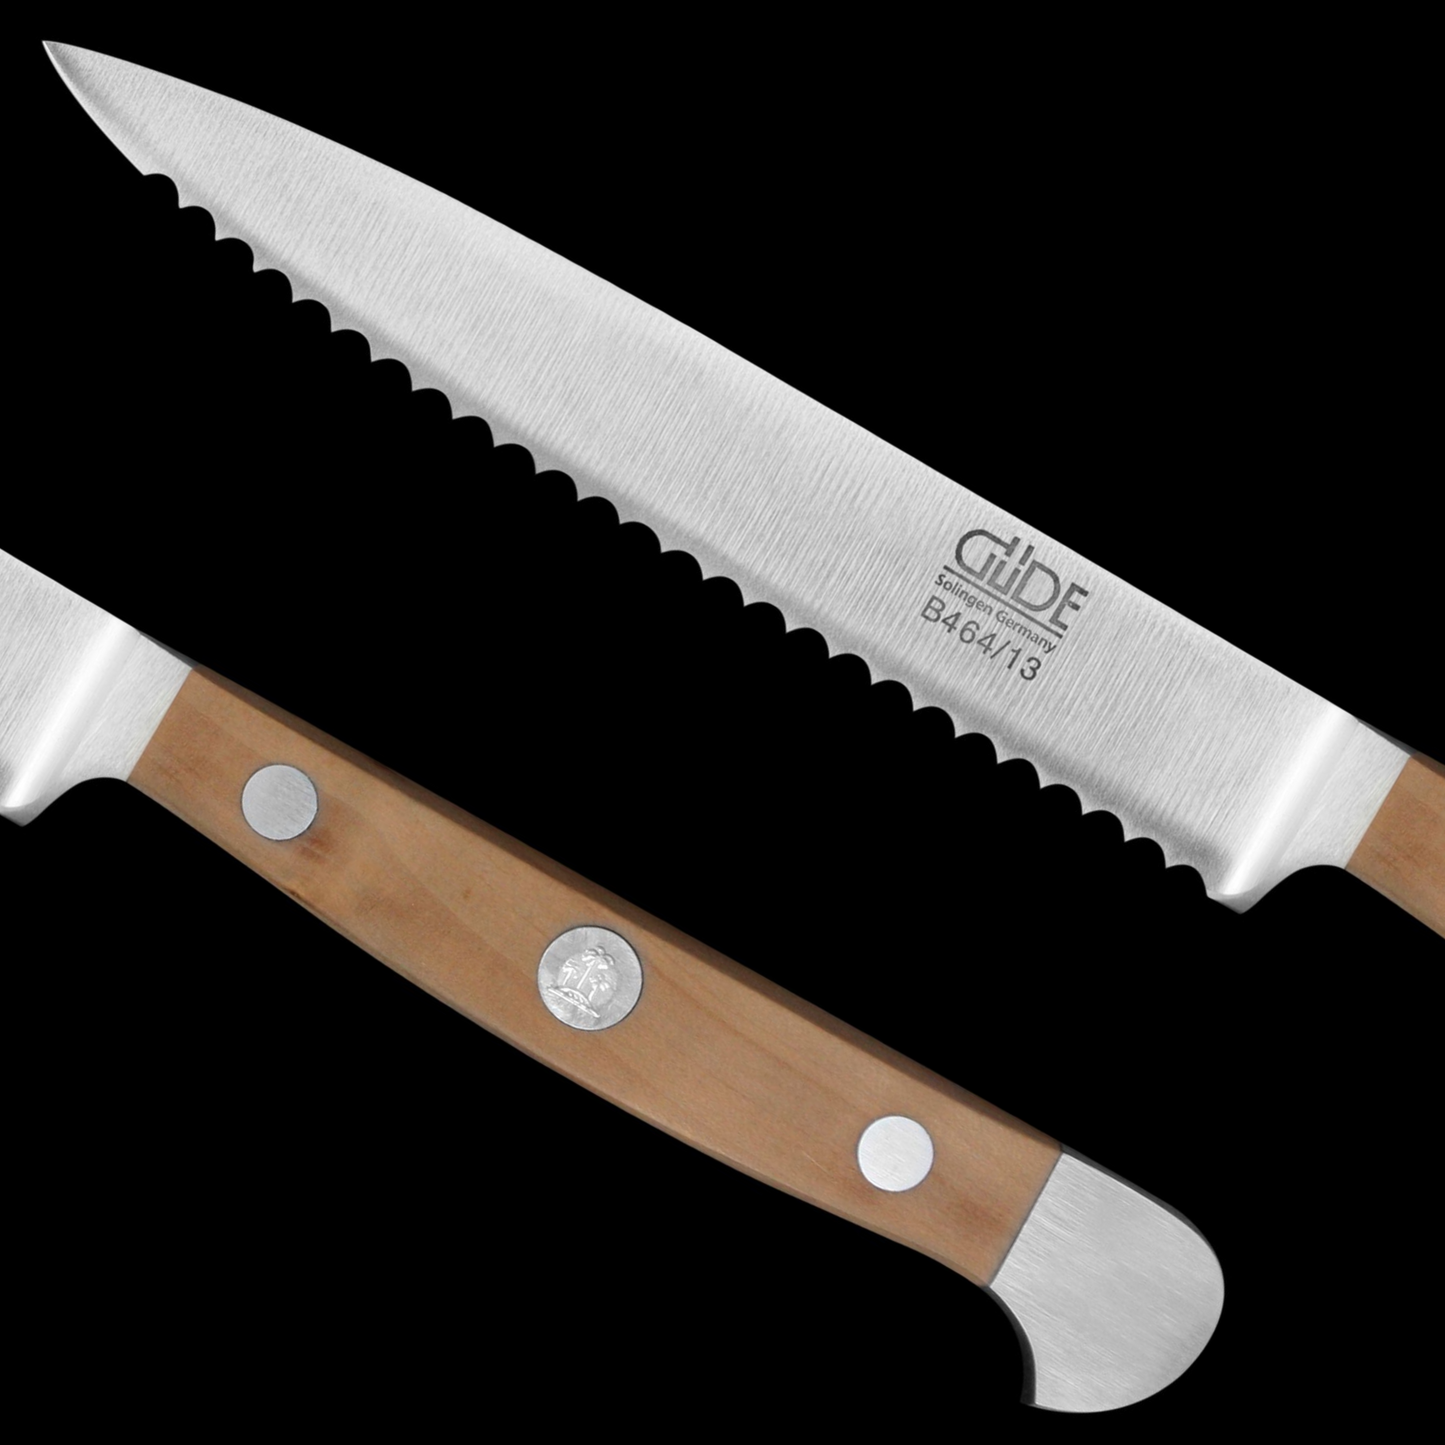 Gude Alpha Birne Series Forged Double Bolster Tomato Knife 5", Pearwood Handle and Serrated Blade - GuedeUSA